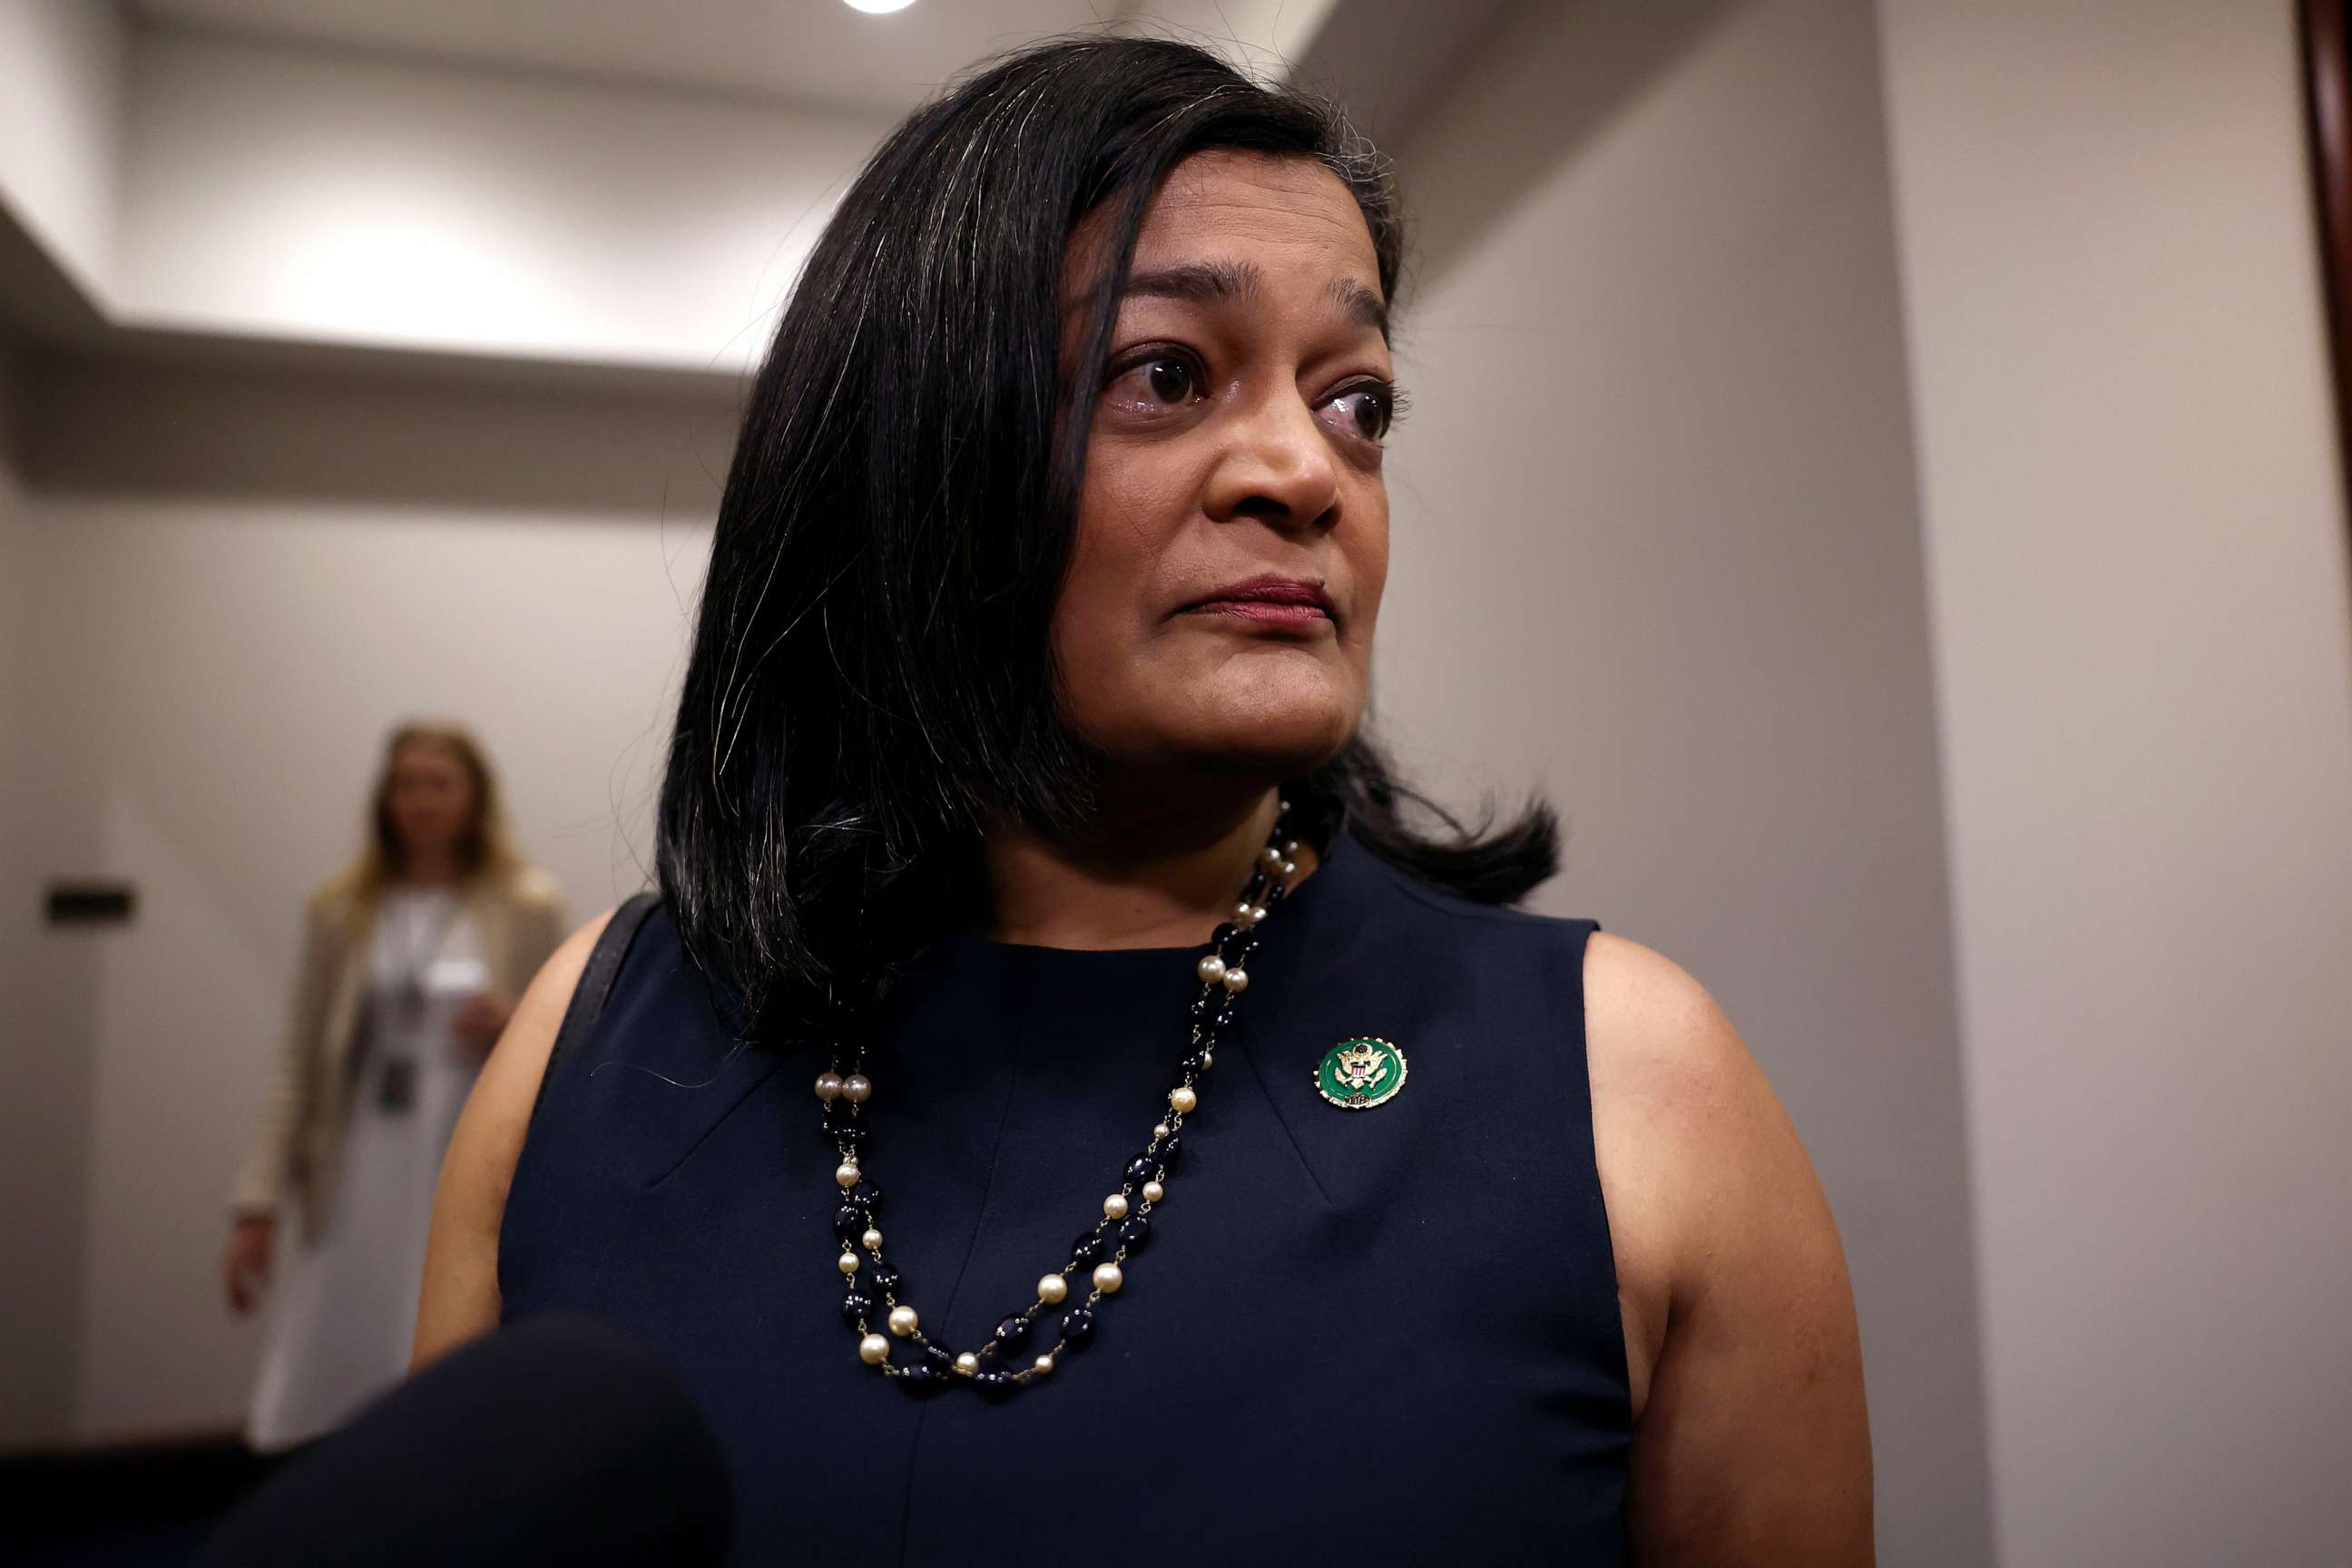 PHOTO: Rep. Pramila Jayapal arrives for a House Democrat caucus meeting at the U.S. Capitol on May 31, 2023 in Washington, DC.